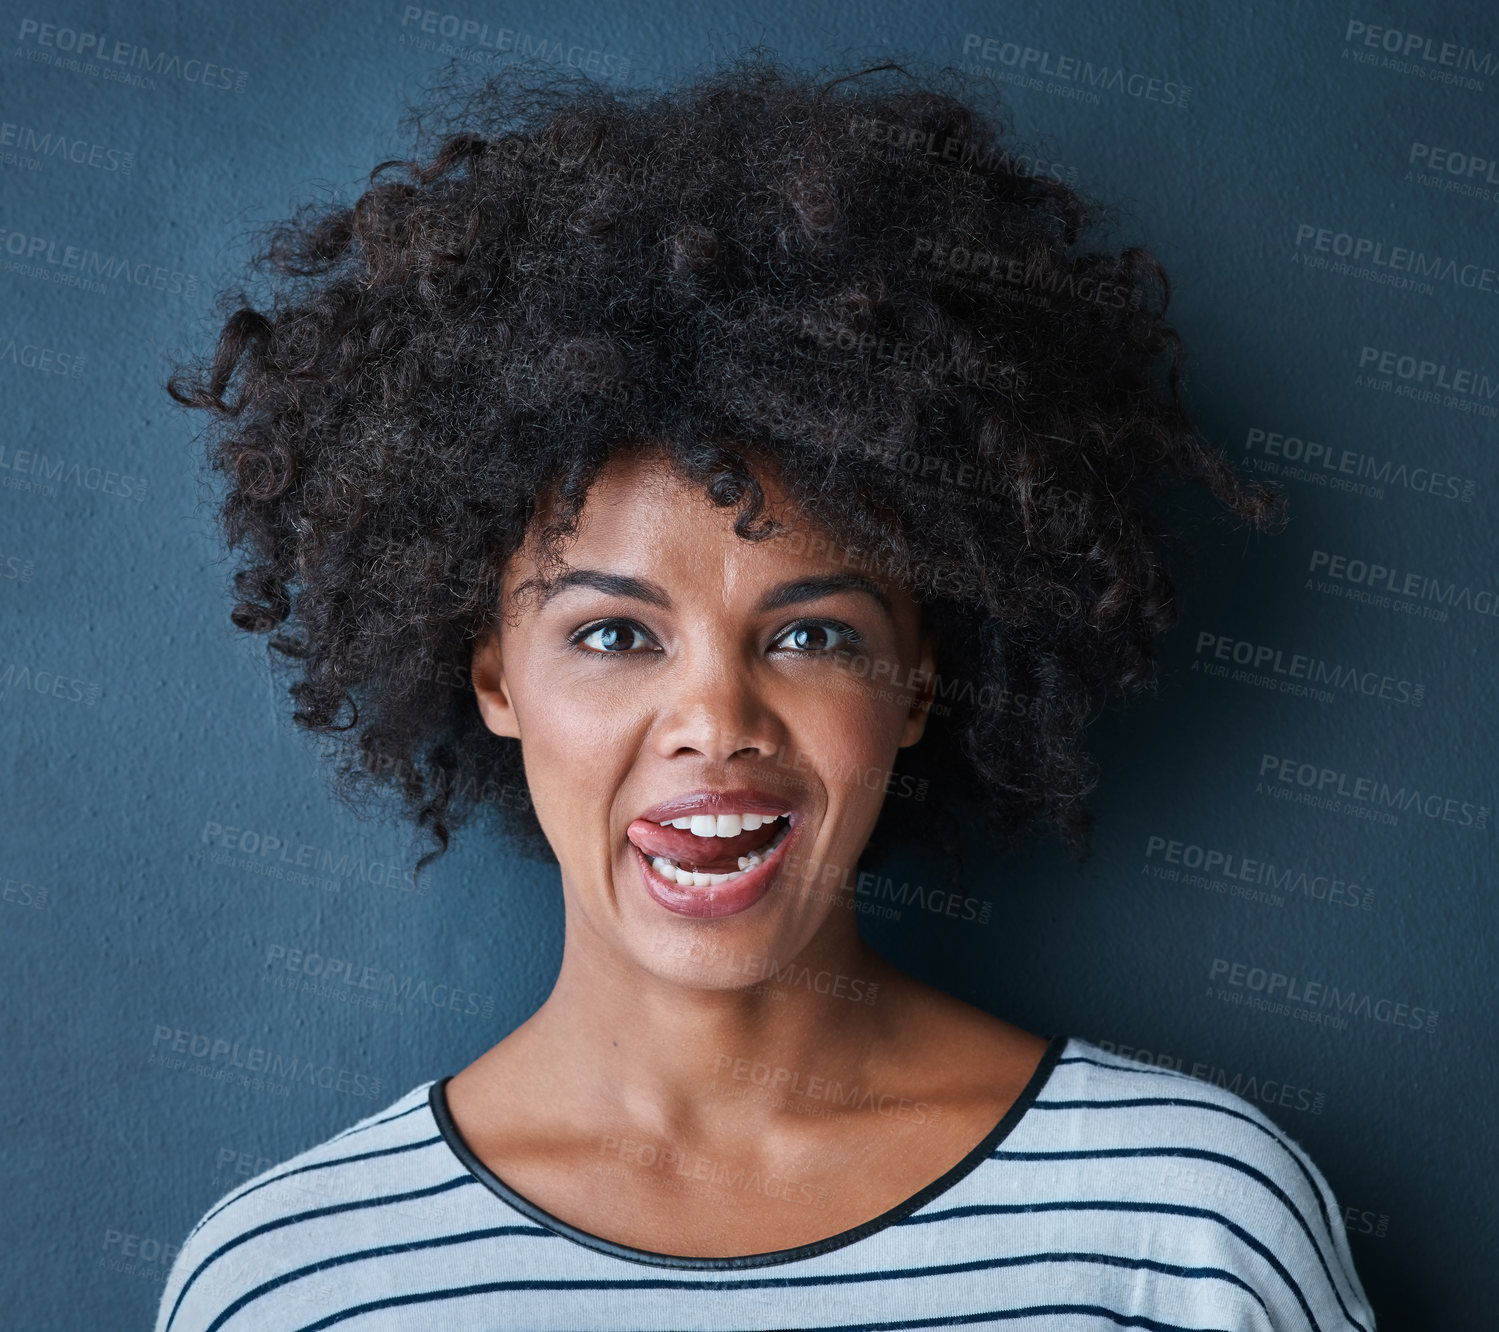 Buy stock photo Studio portrait of an attractive young woman playfully sticking her tongue out against a blue background